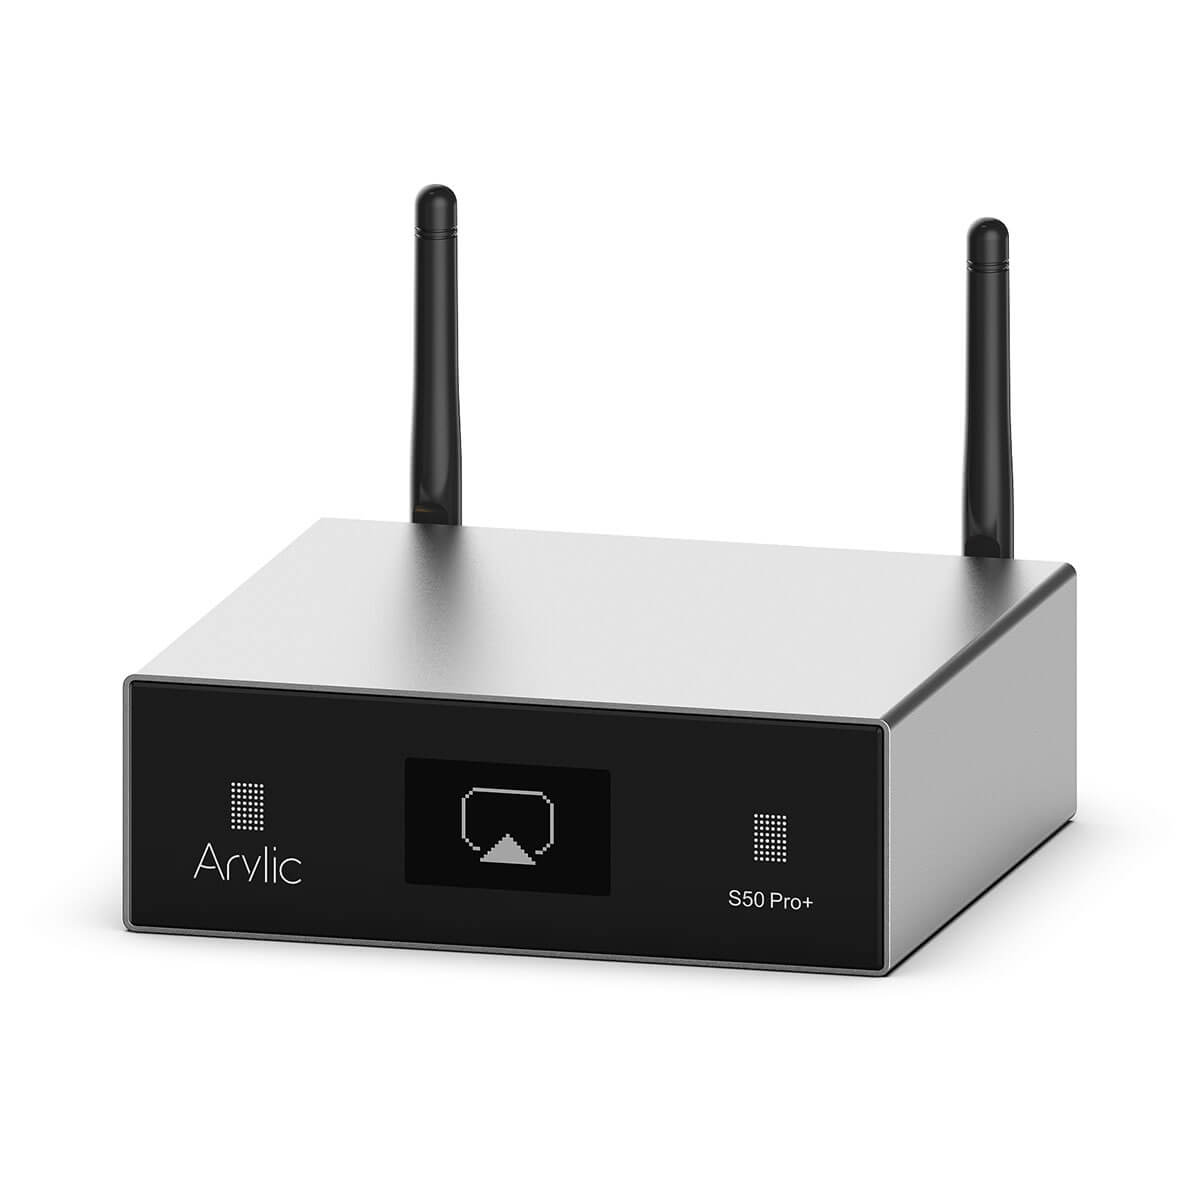 Arylic® H50 Wireless Amplifier With AirPlay 2 & Works with Alexa